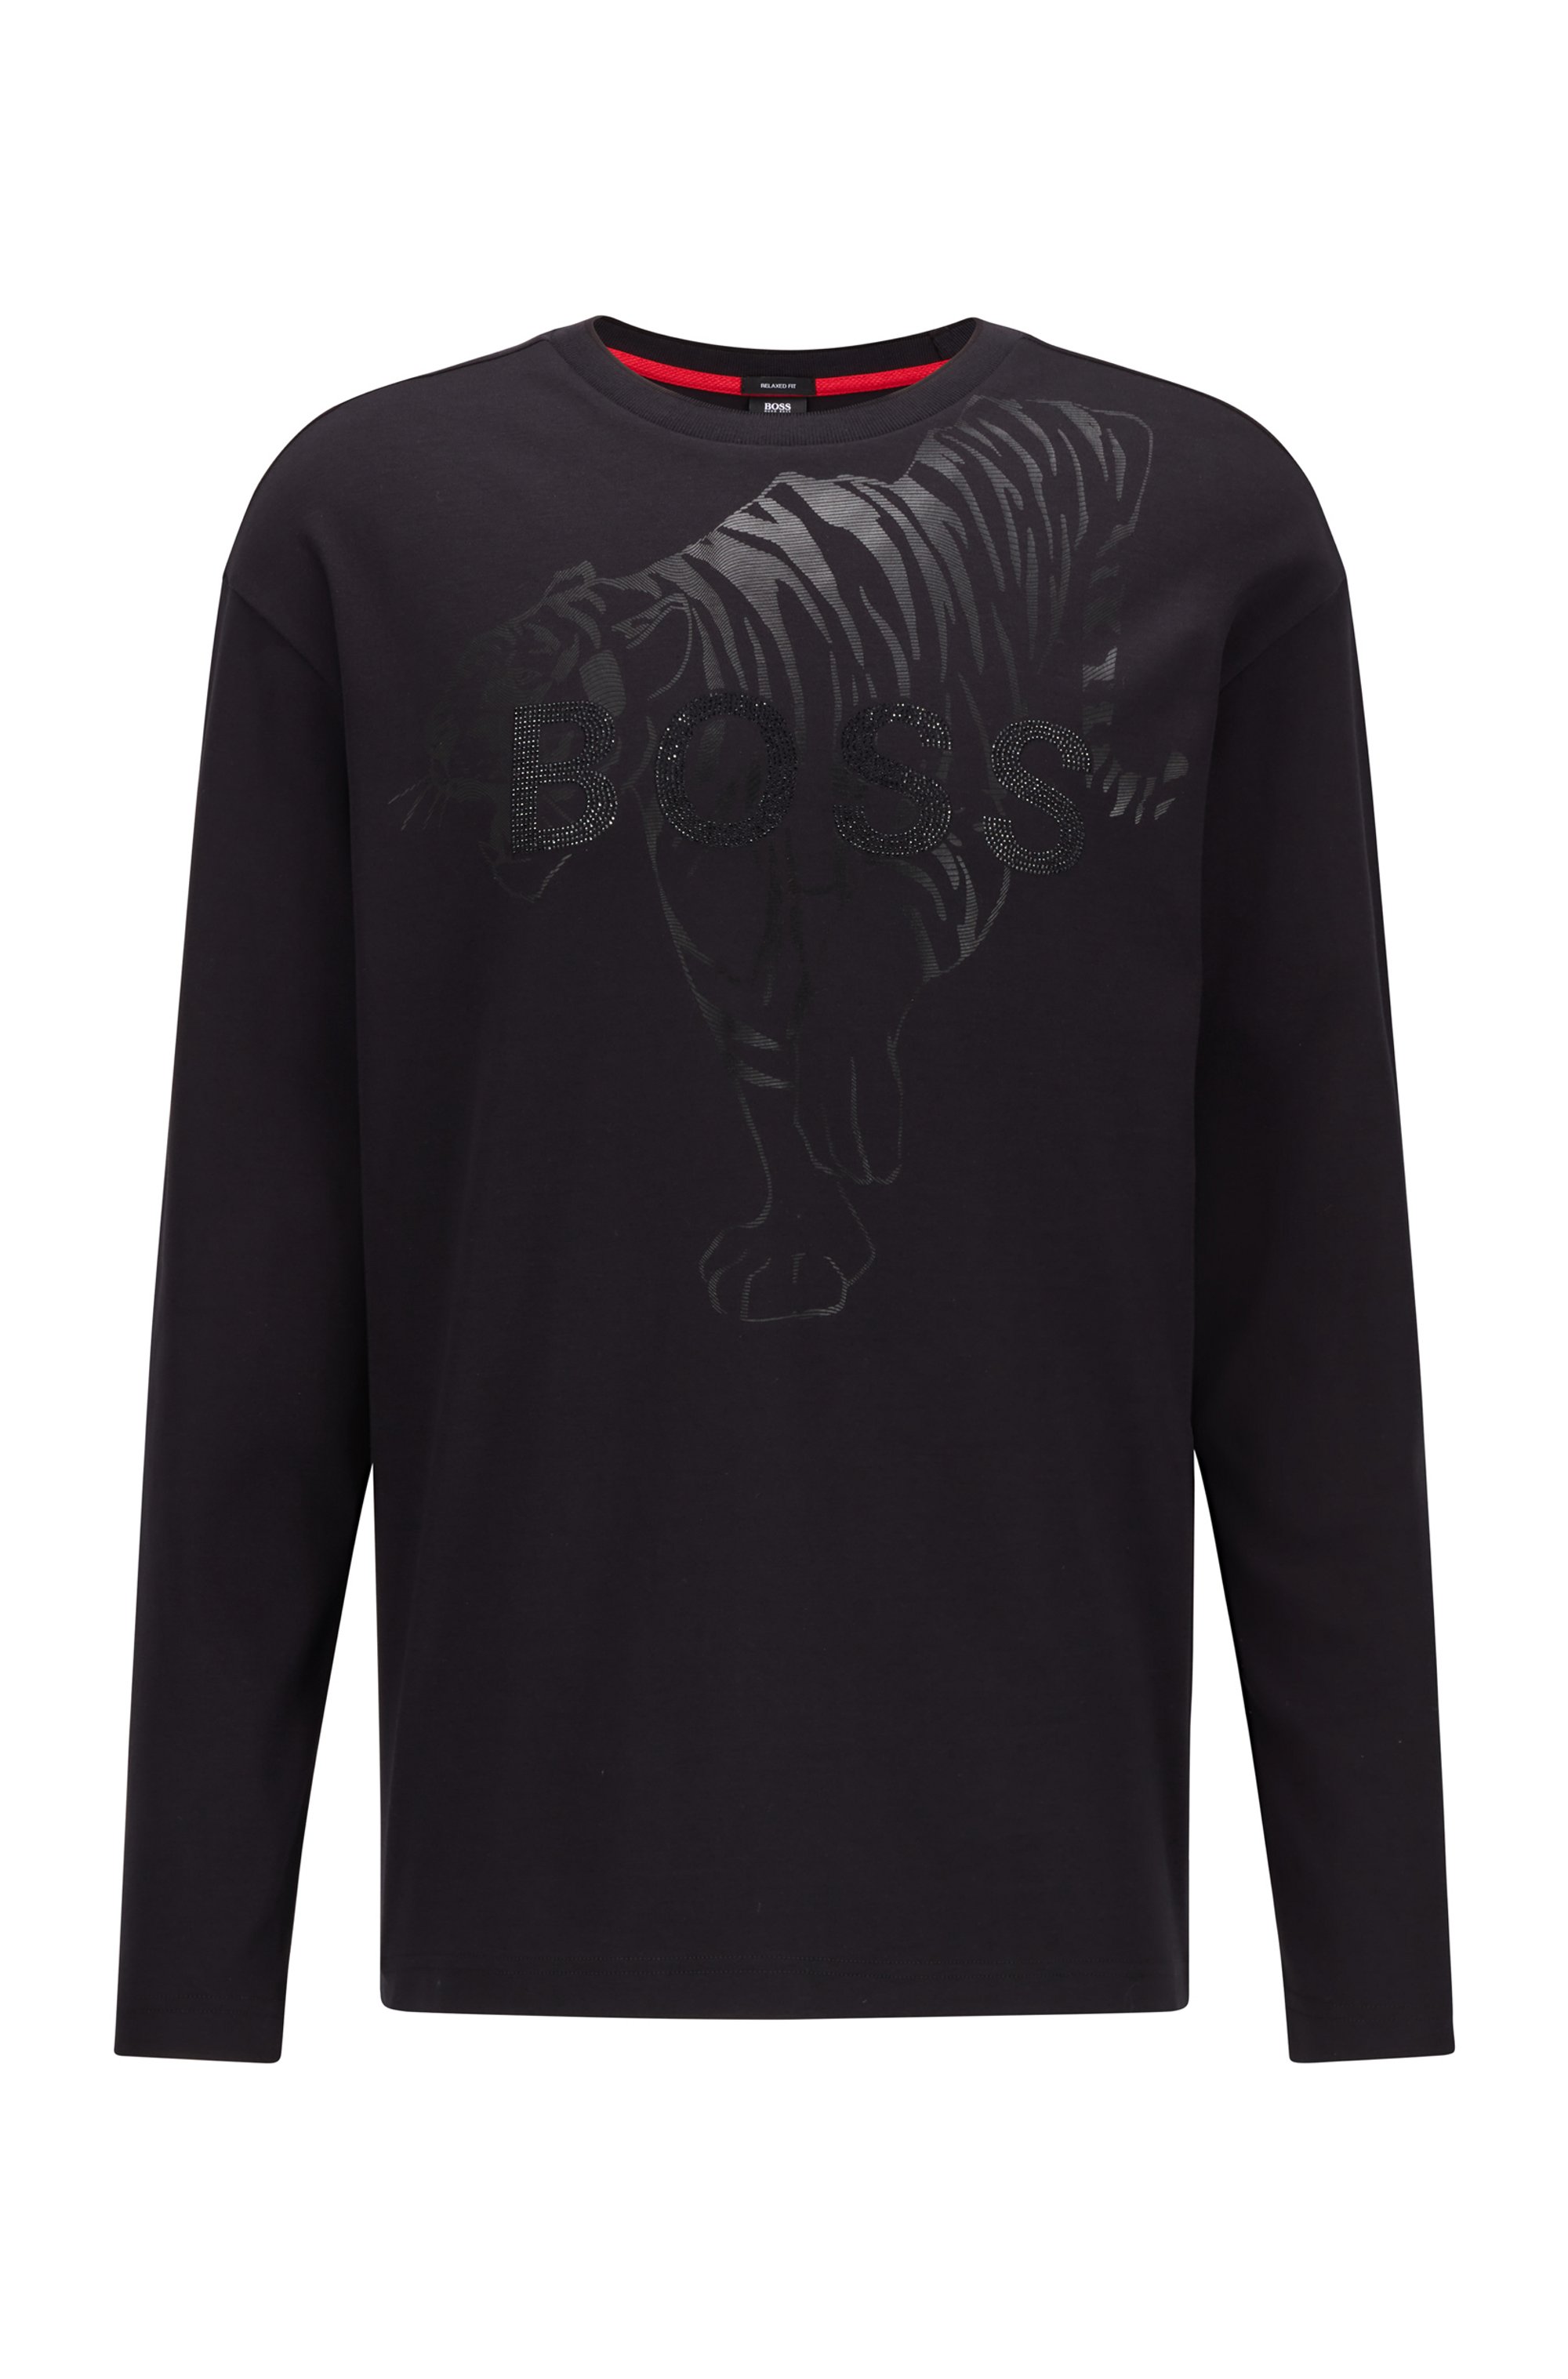 Long-sleeved T-shirt in organic cotton with tiger artwork, Black